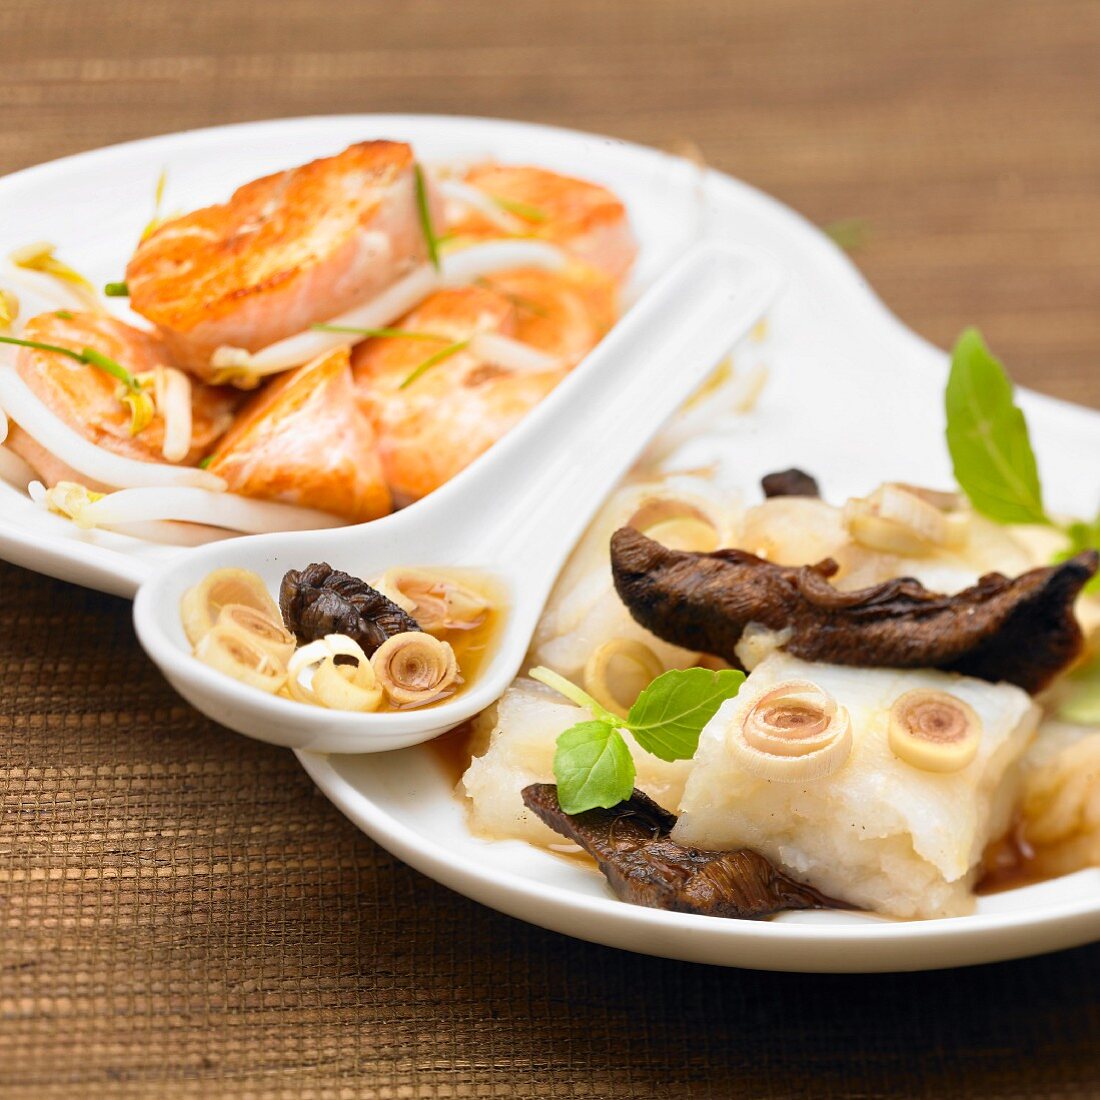 Steamed fish with ginger and mushrooms and salmon with soya